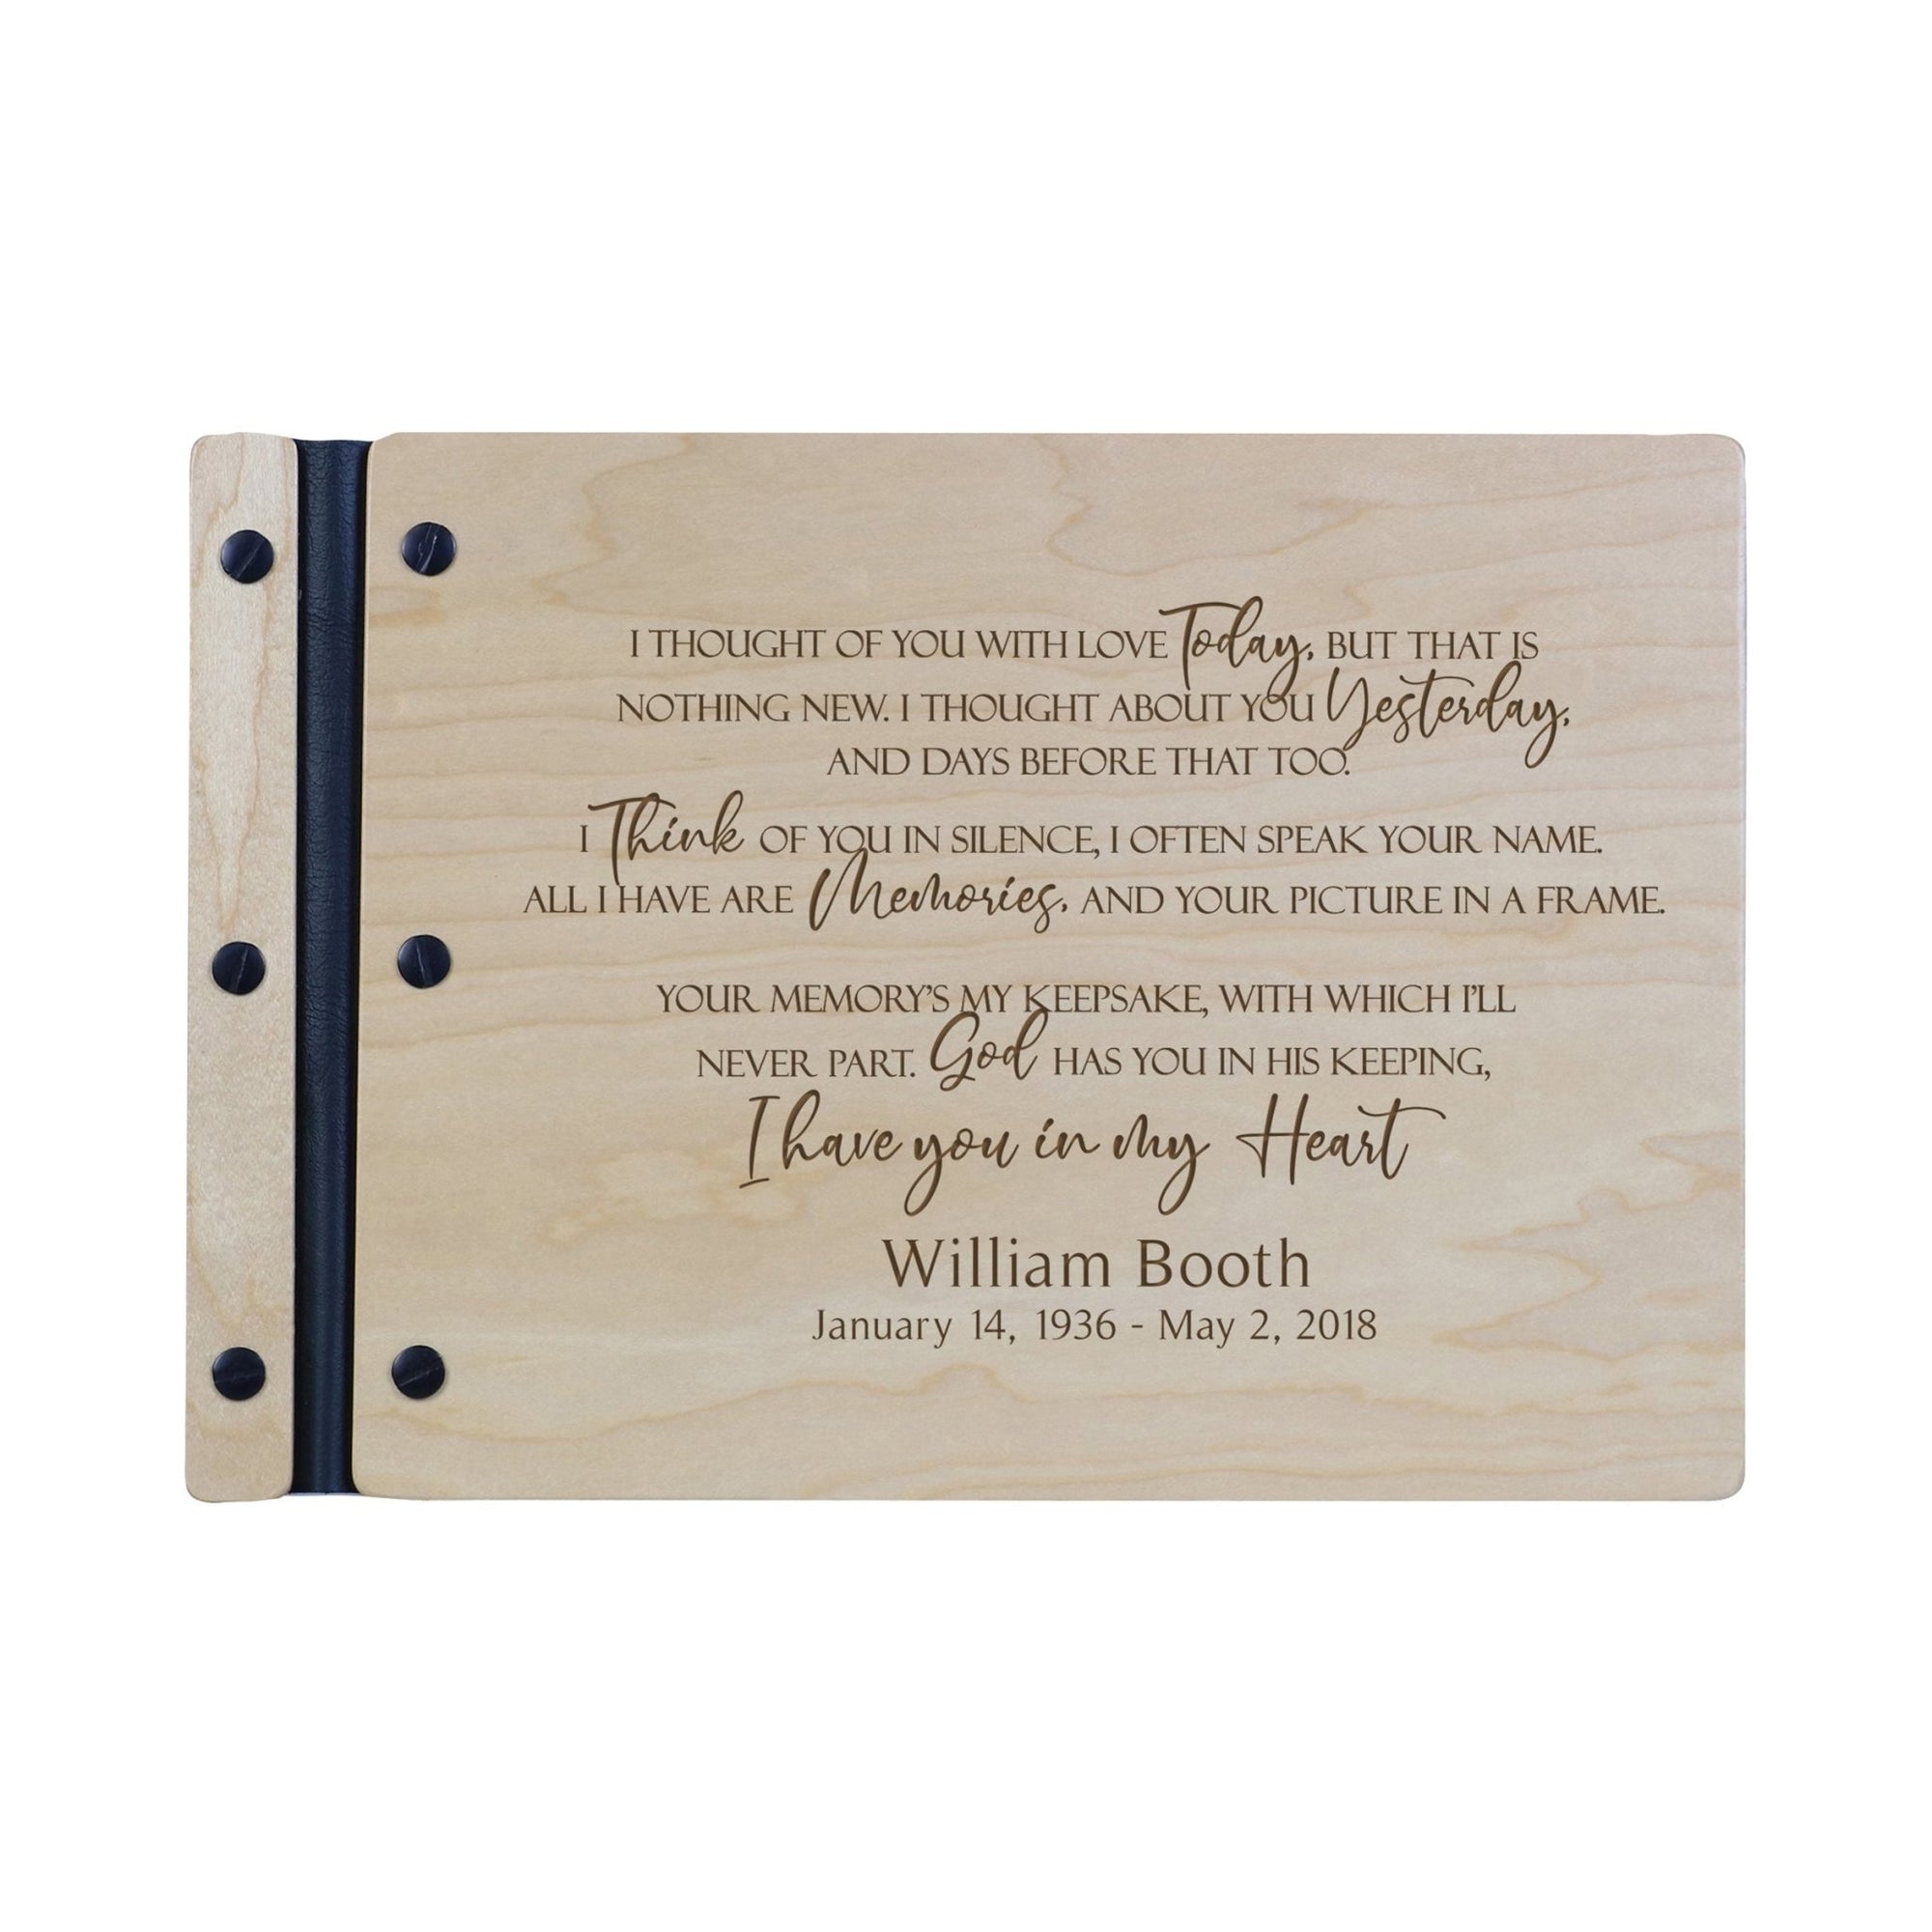 Custom Engraved Wooden Memorial Guestbook 12.375” x 8.5” x .75” I Thought Of You - LifeSong Milestones